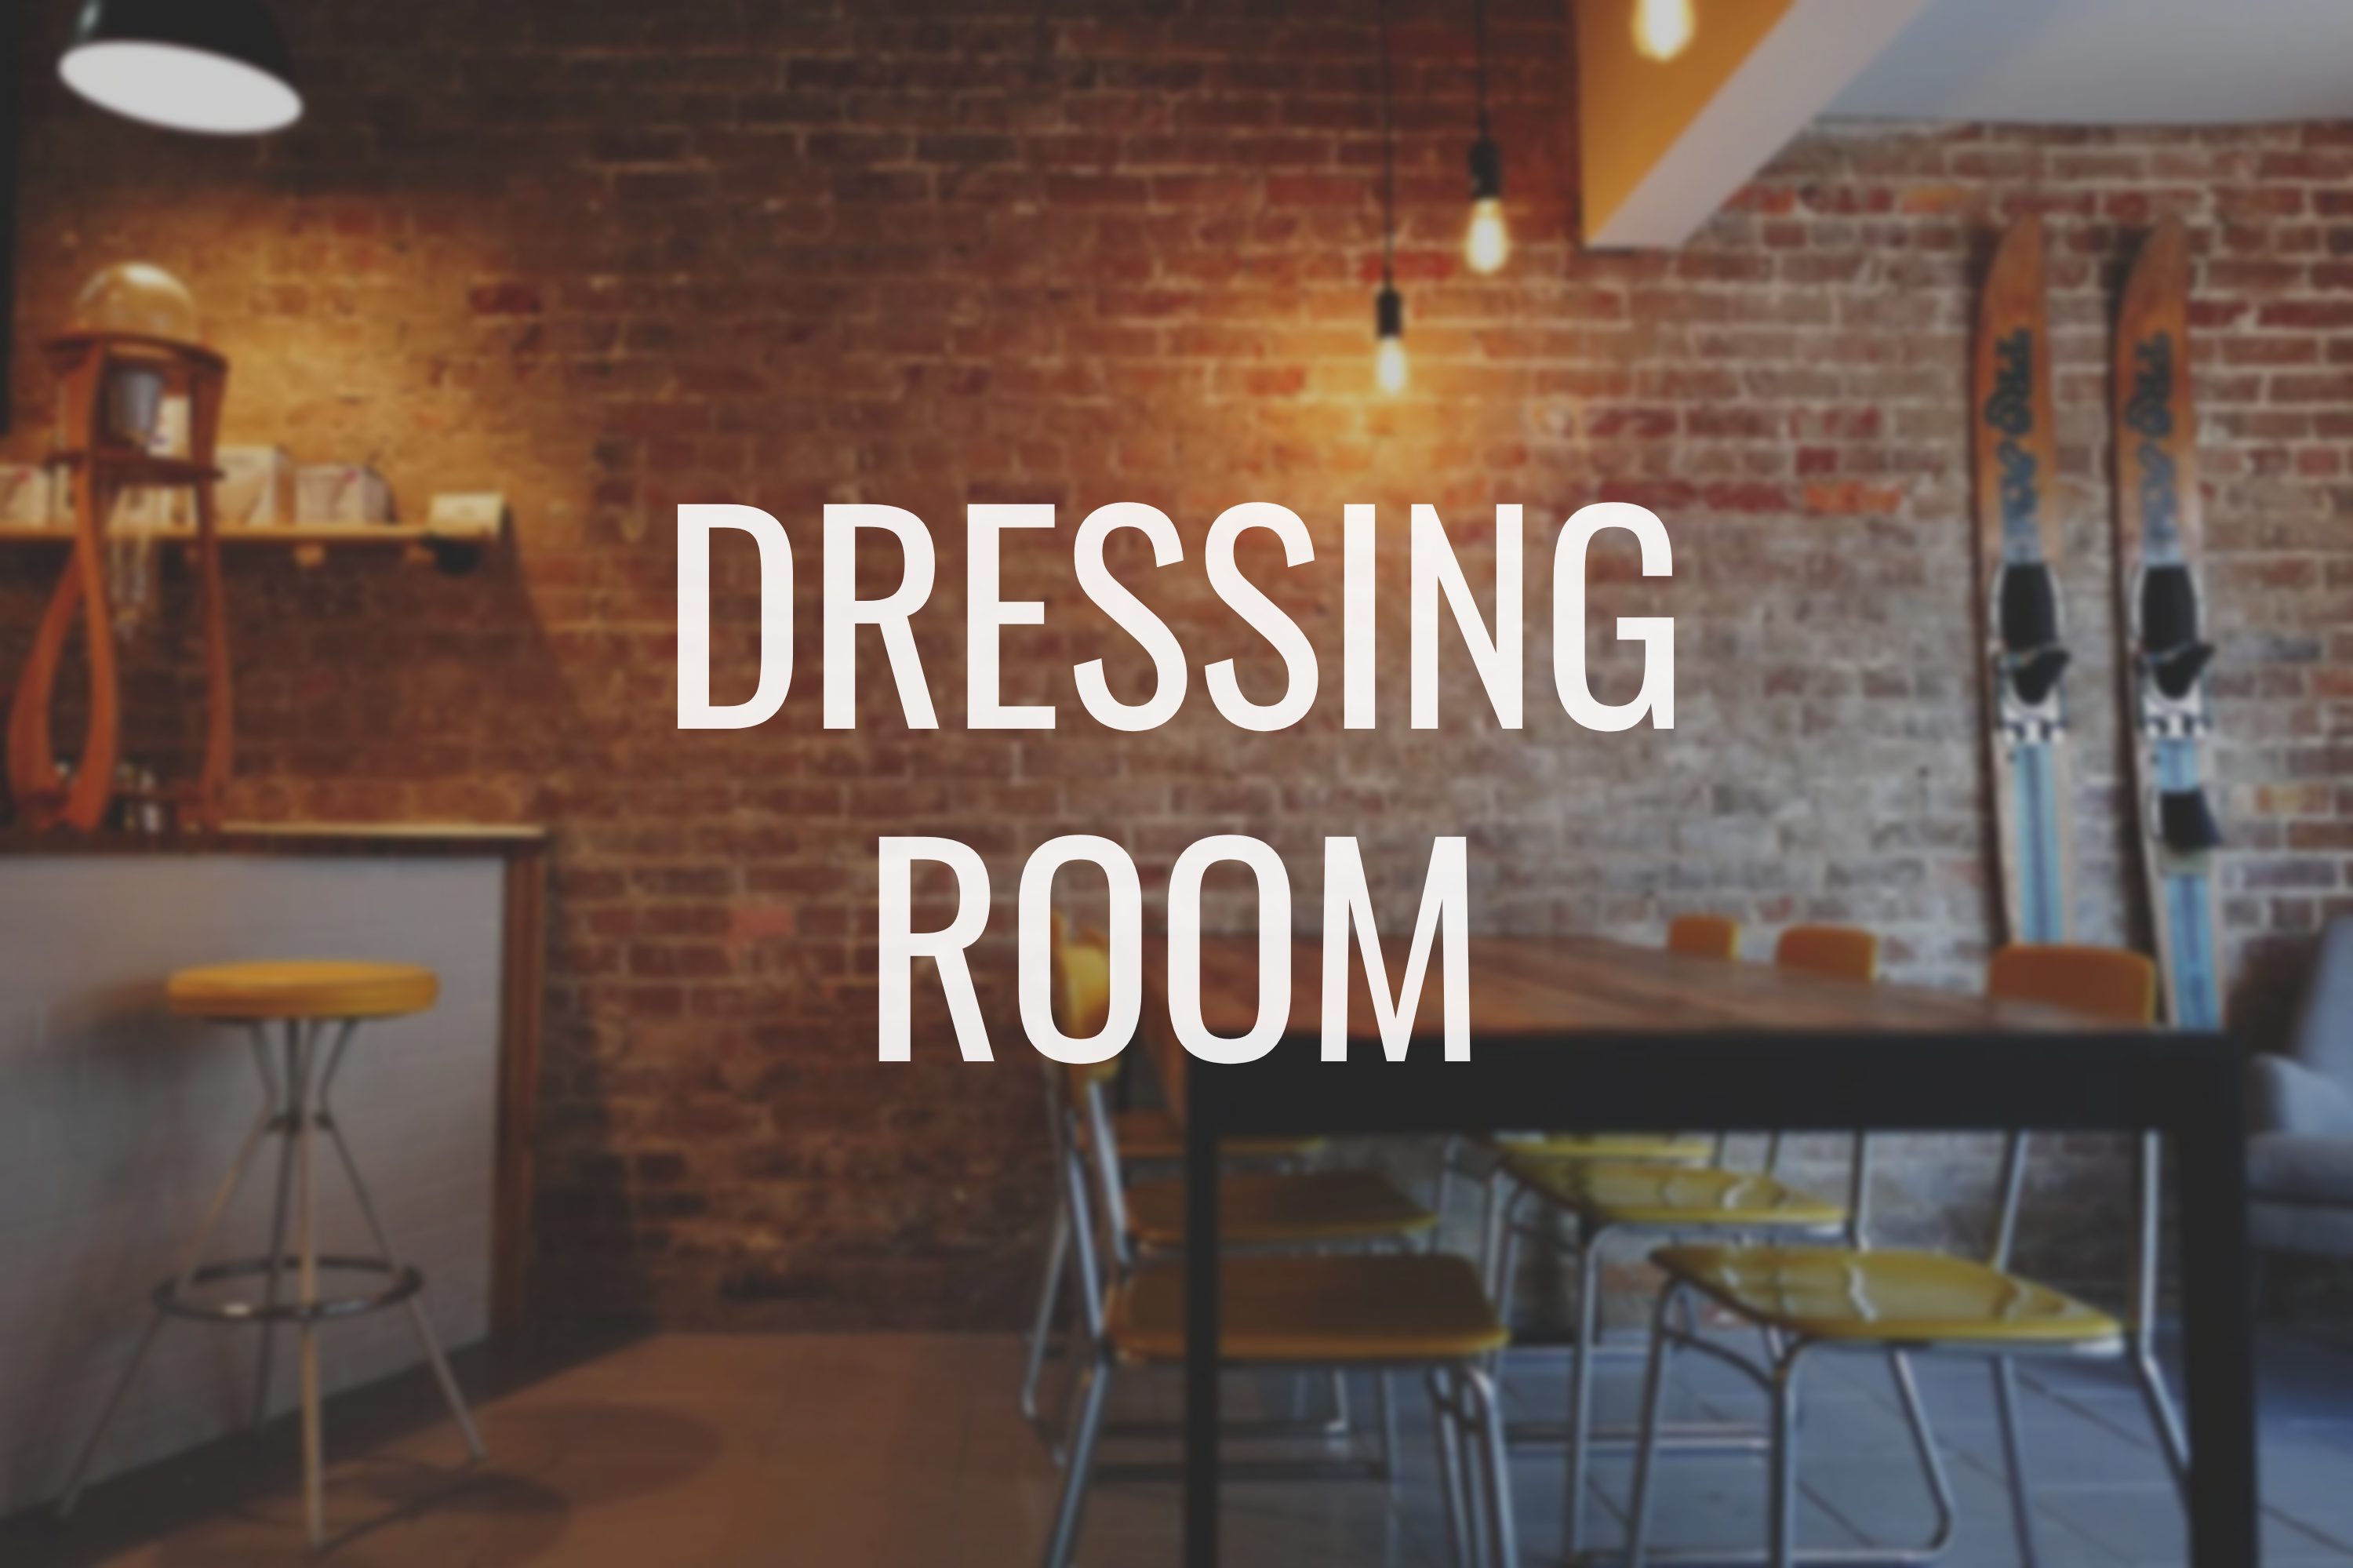 Dressing Room Decal - Vinyl Sticker for Businesses, Stores, Bars, Coffee Shops, Eatery, Cafeteria, Food Truck!